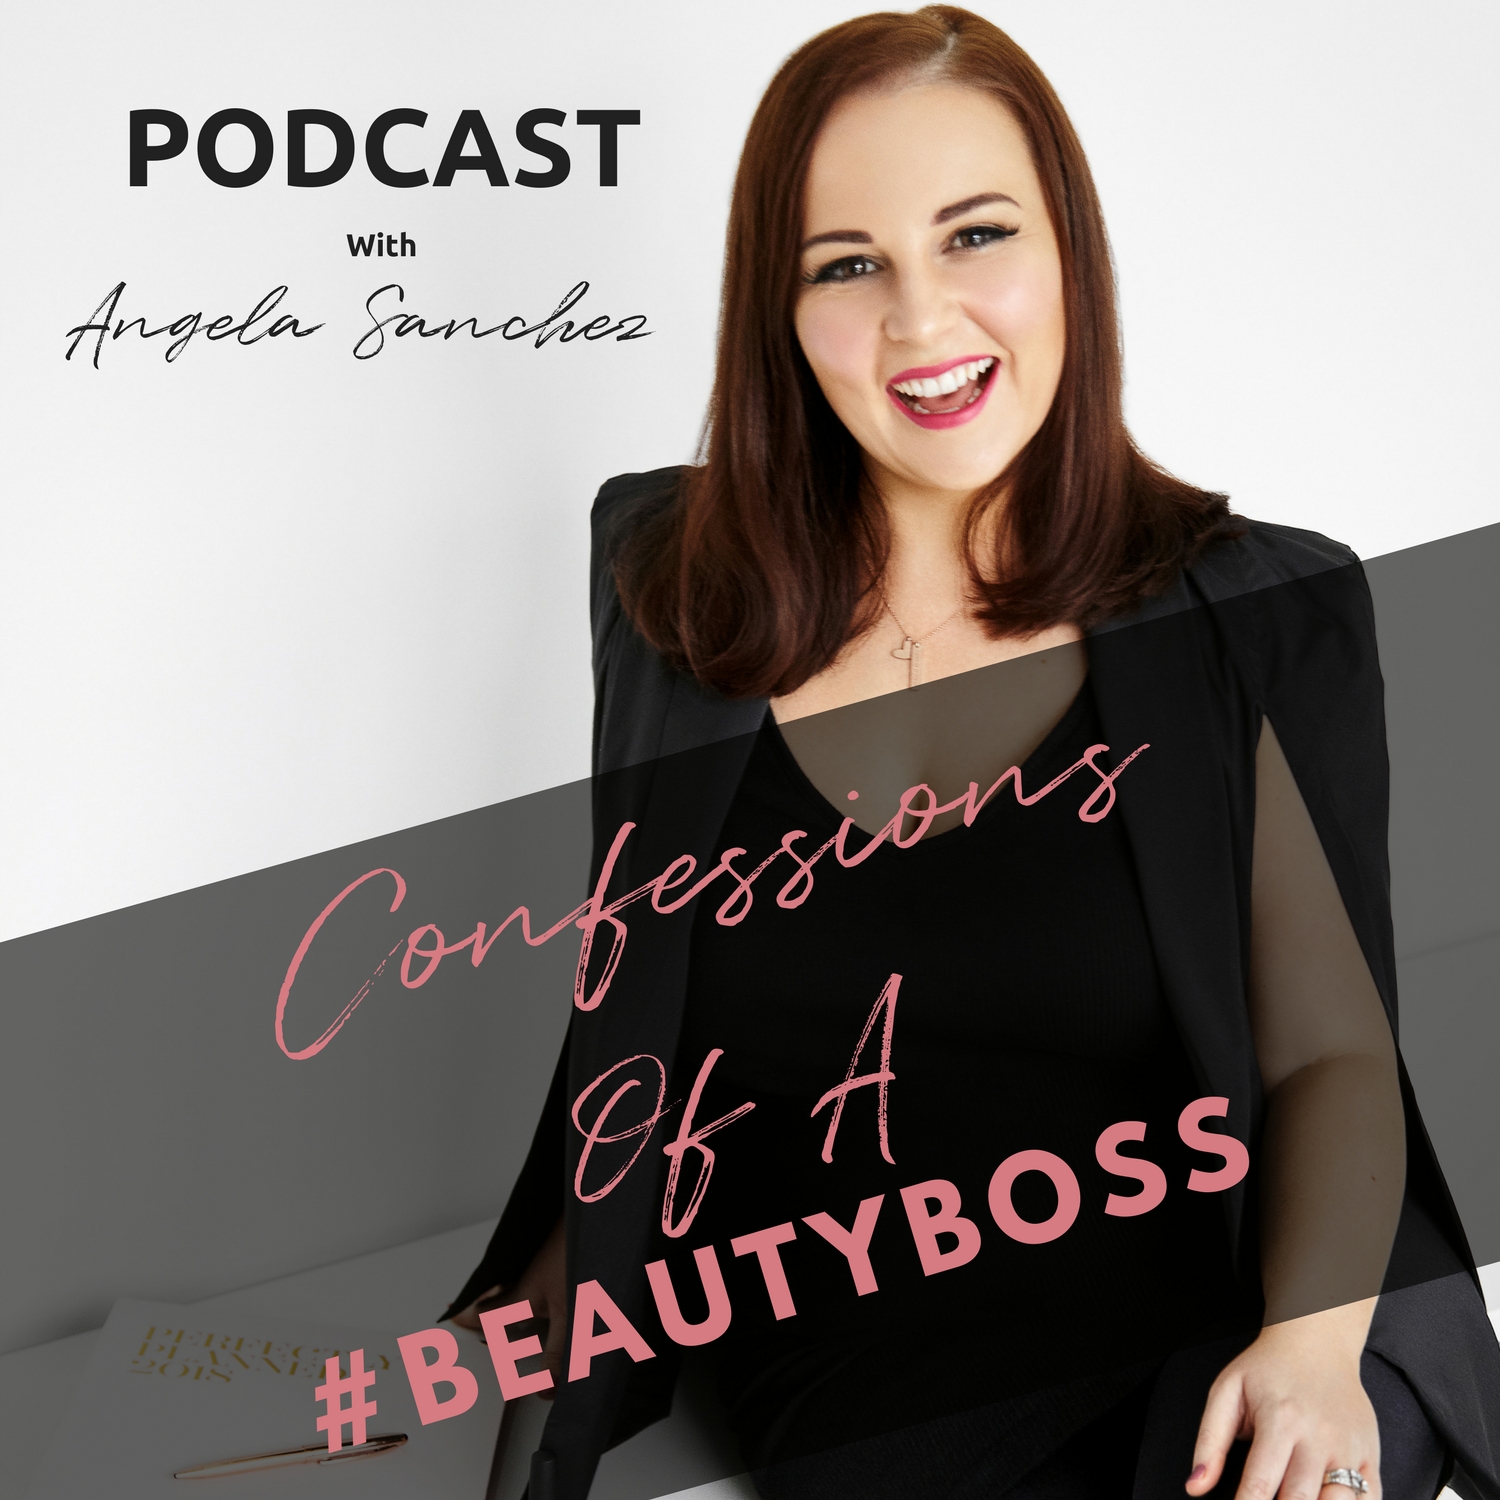 3: Nicola Le Lievre and her BeautyBoss journey in becomming owner of one of the most beautiful boutique beauty salons in Brisbane, InTherapy.